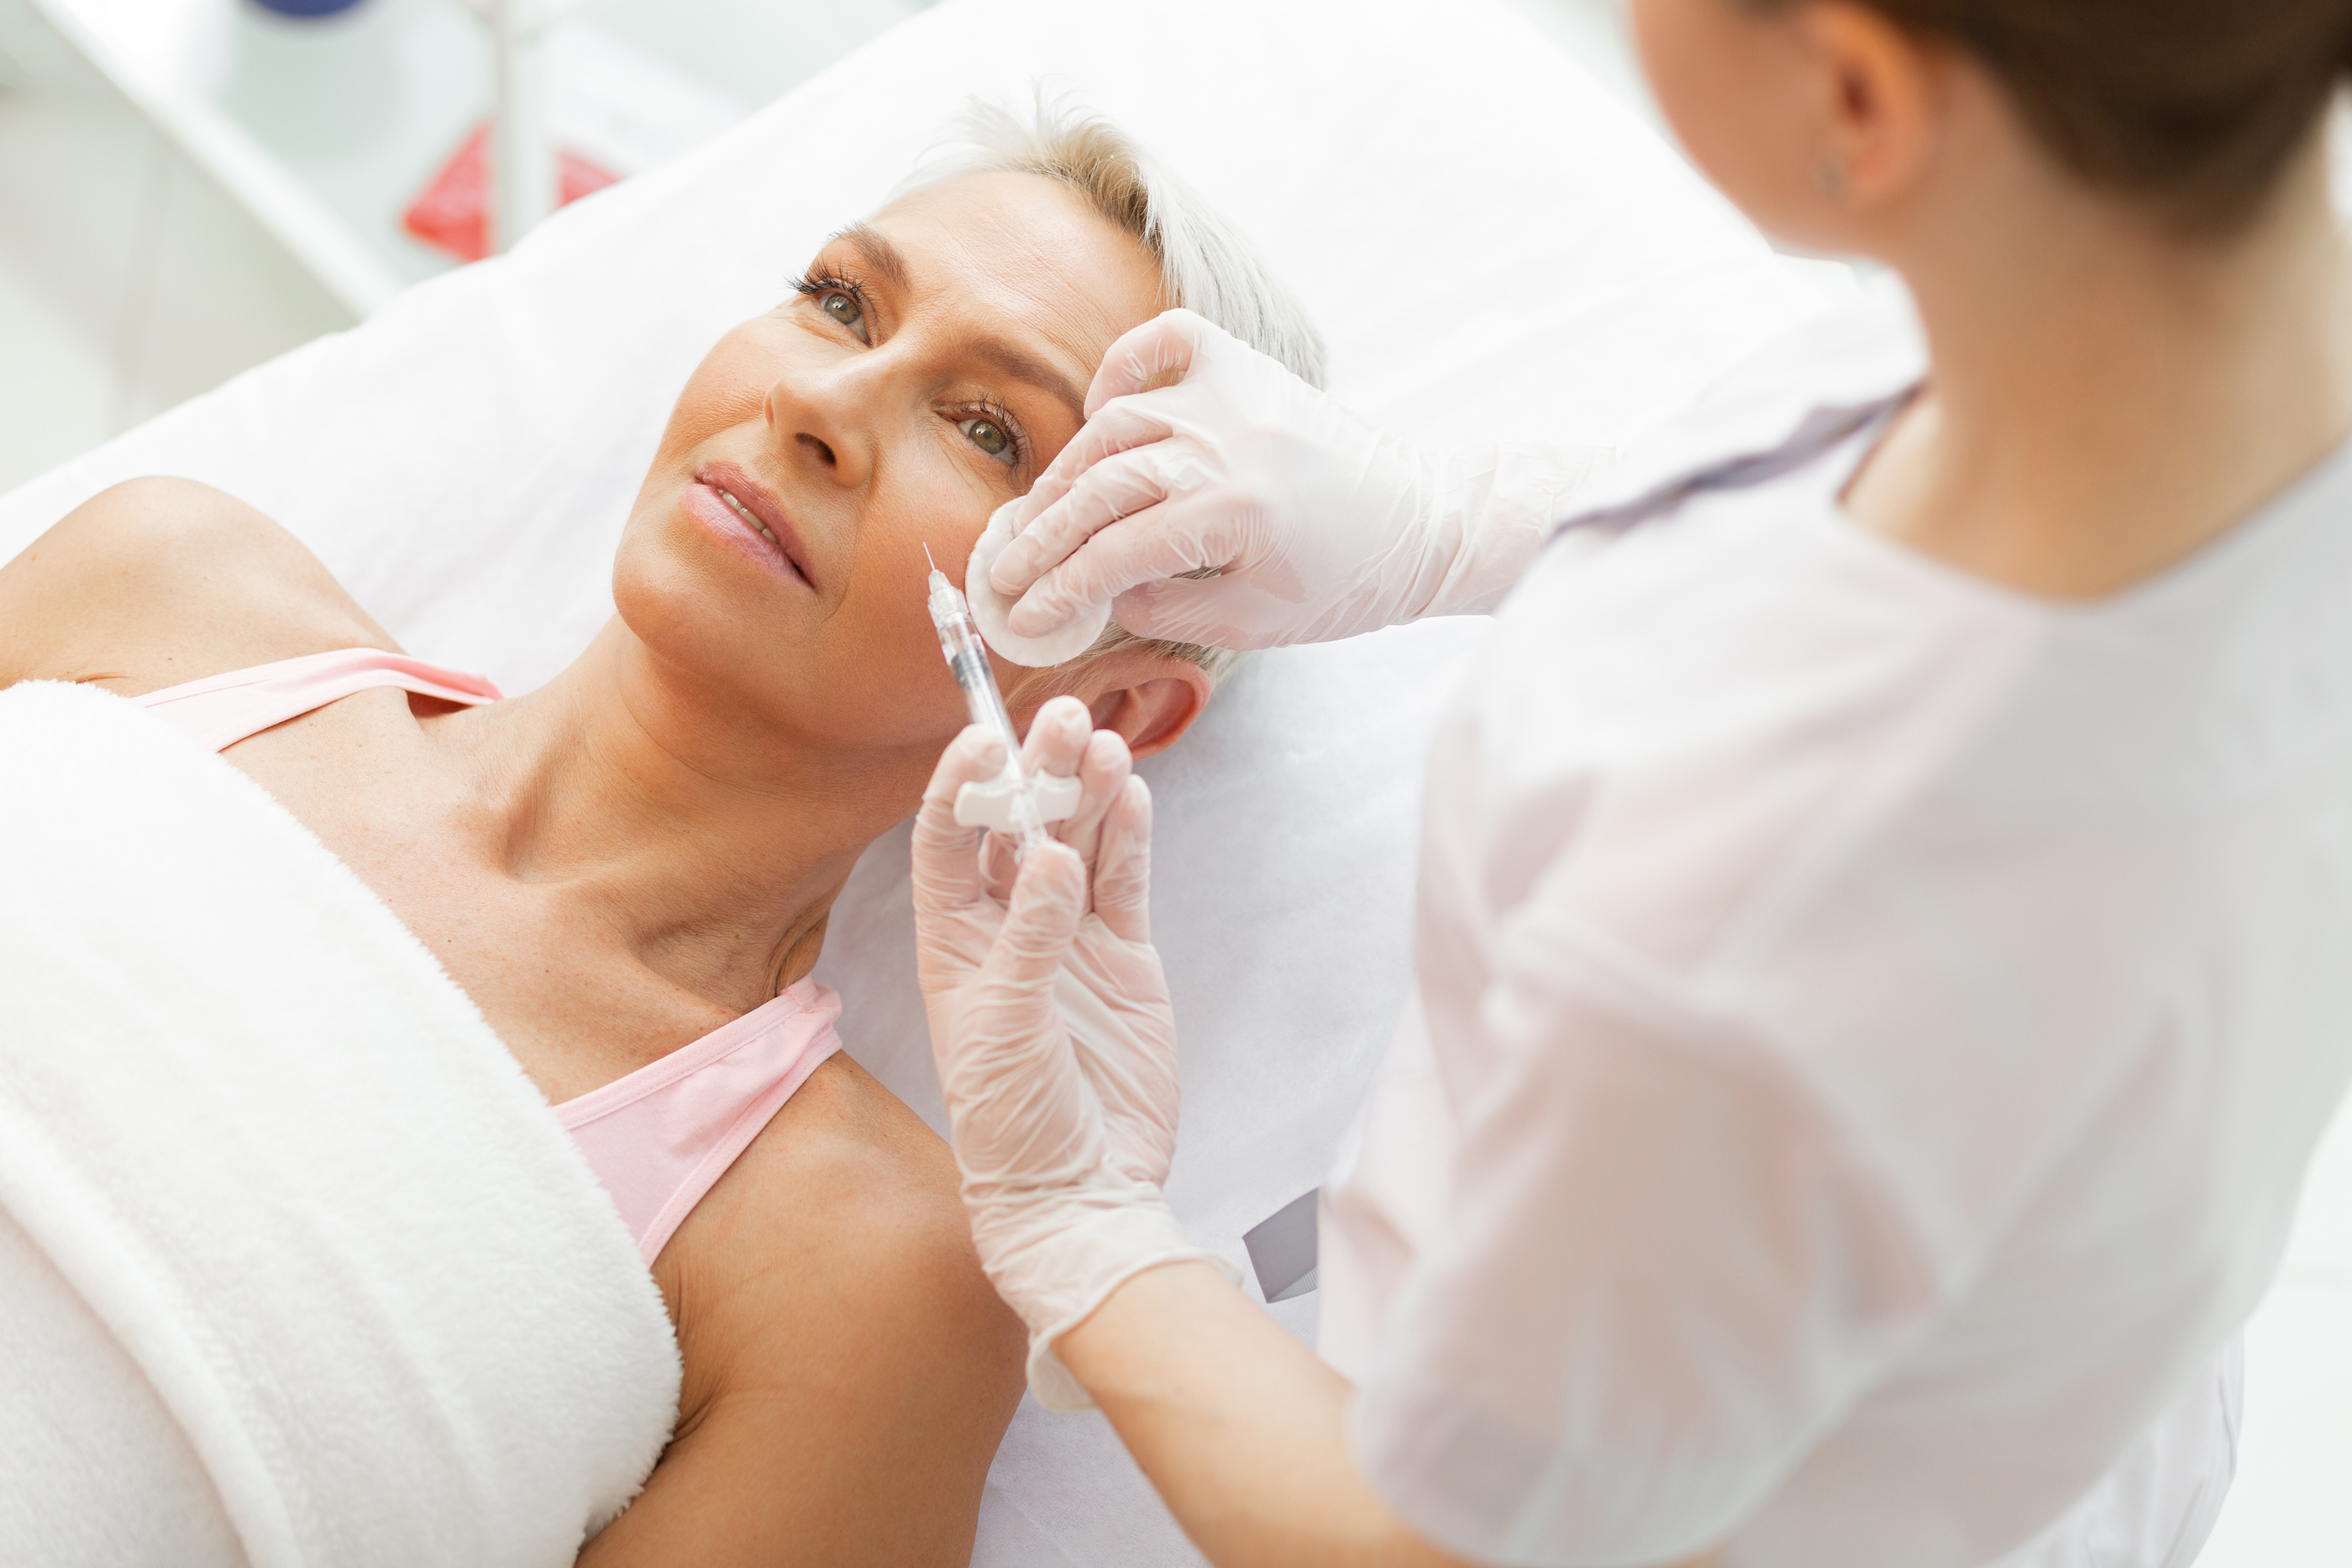 What Other Treatments Can Botox InjectionS tREAT